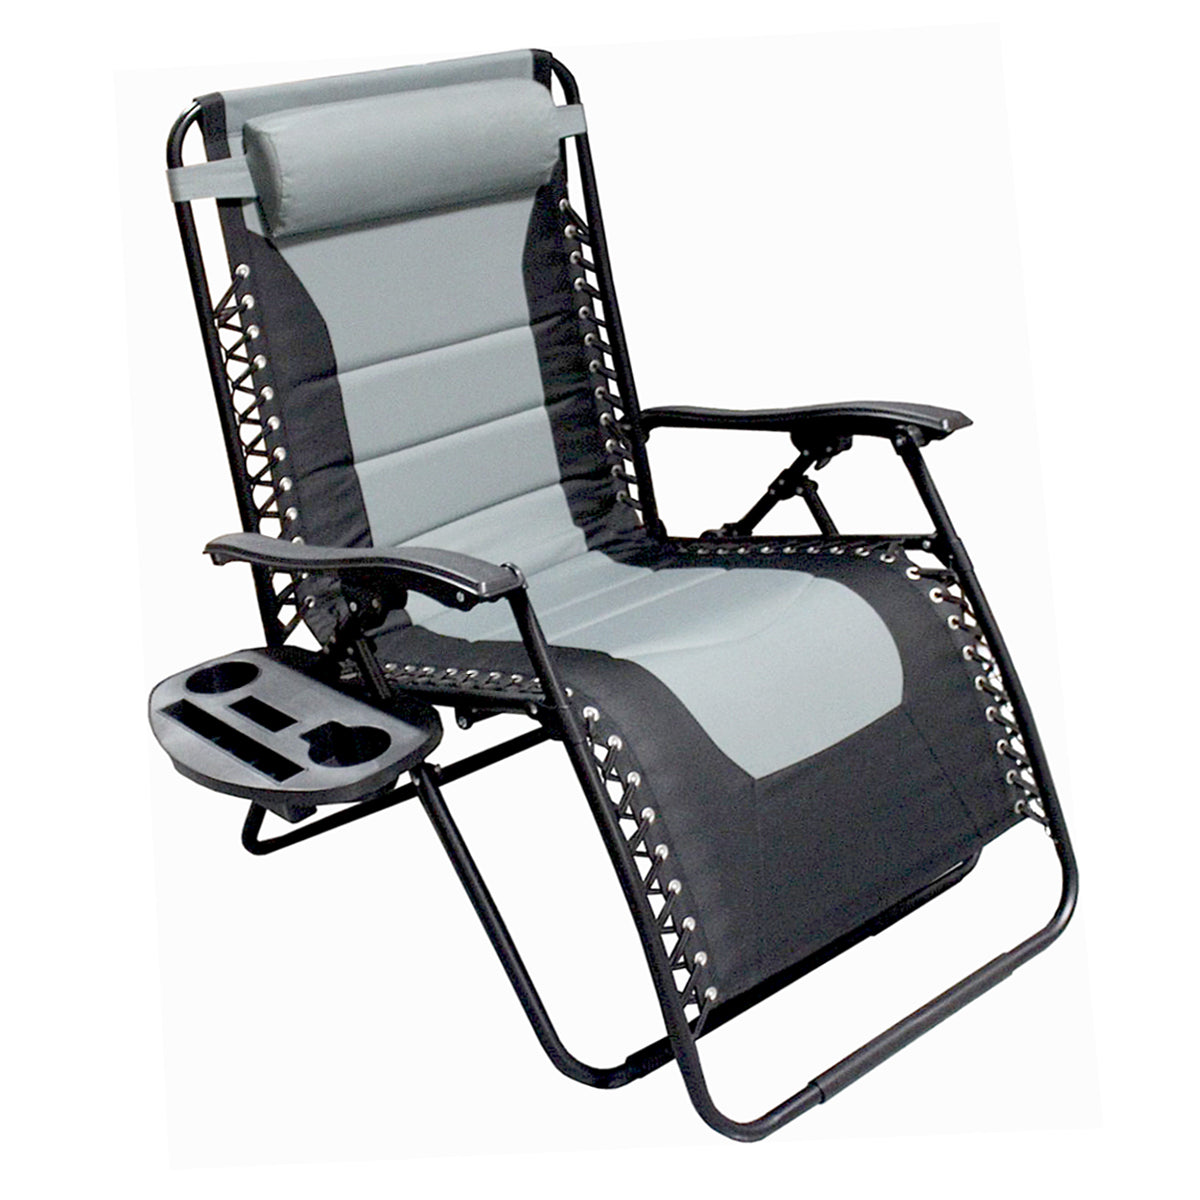 Trappers Peak Padded Zero Gravity Chair with Removable Pillow and Side Table, Grey/Black